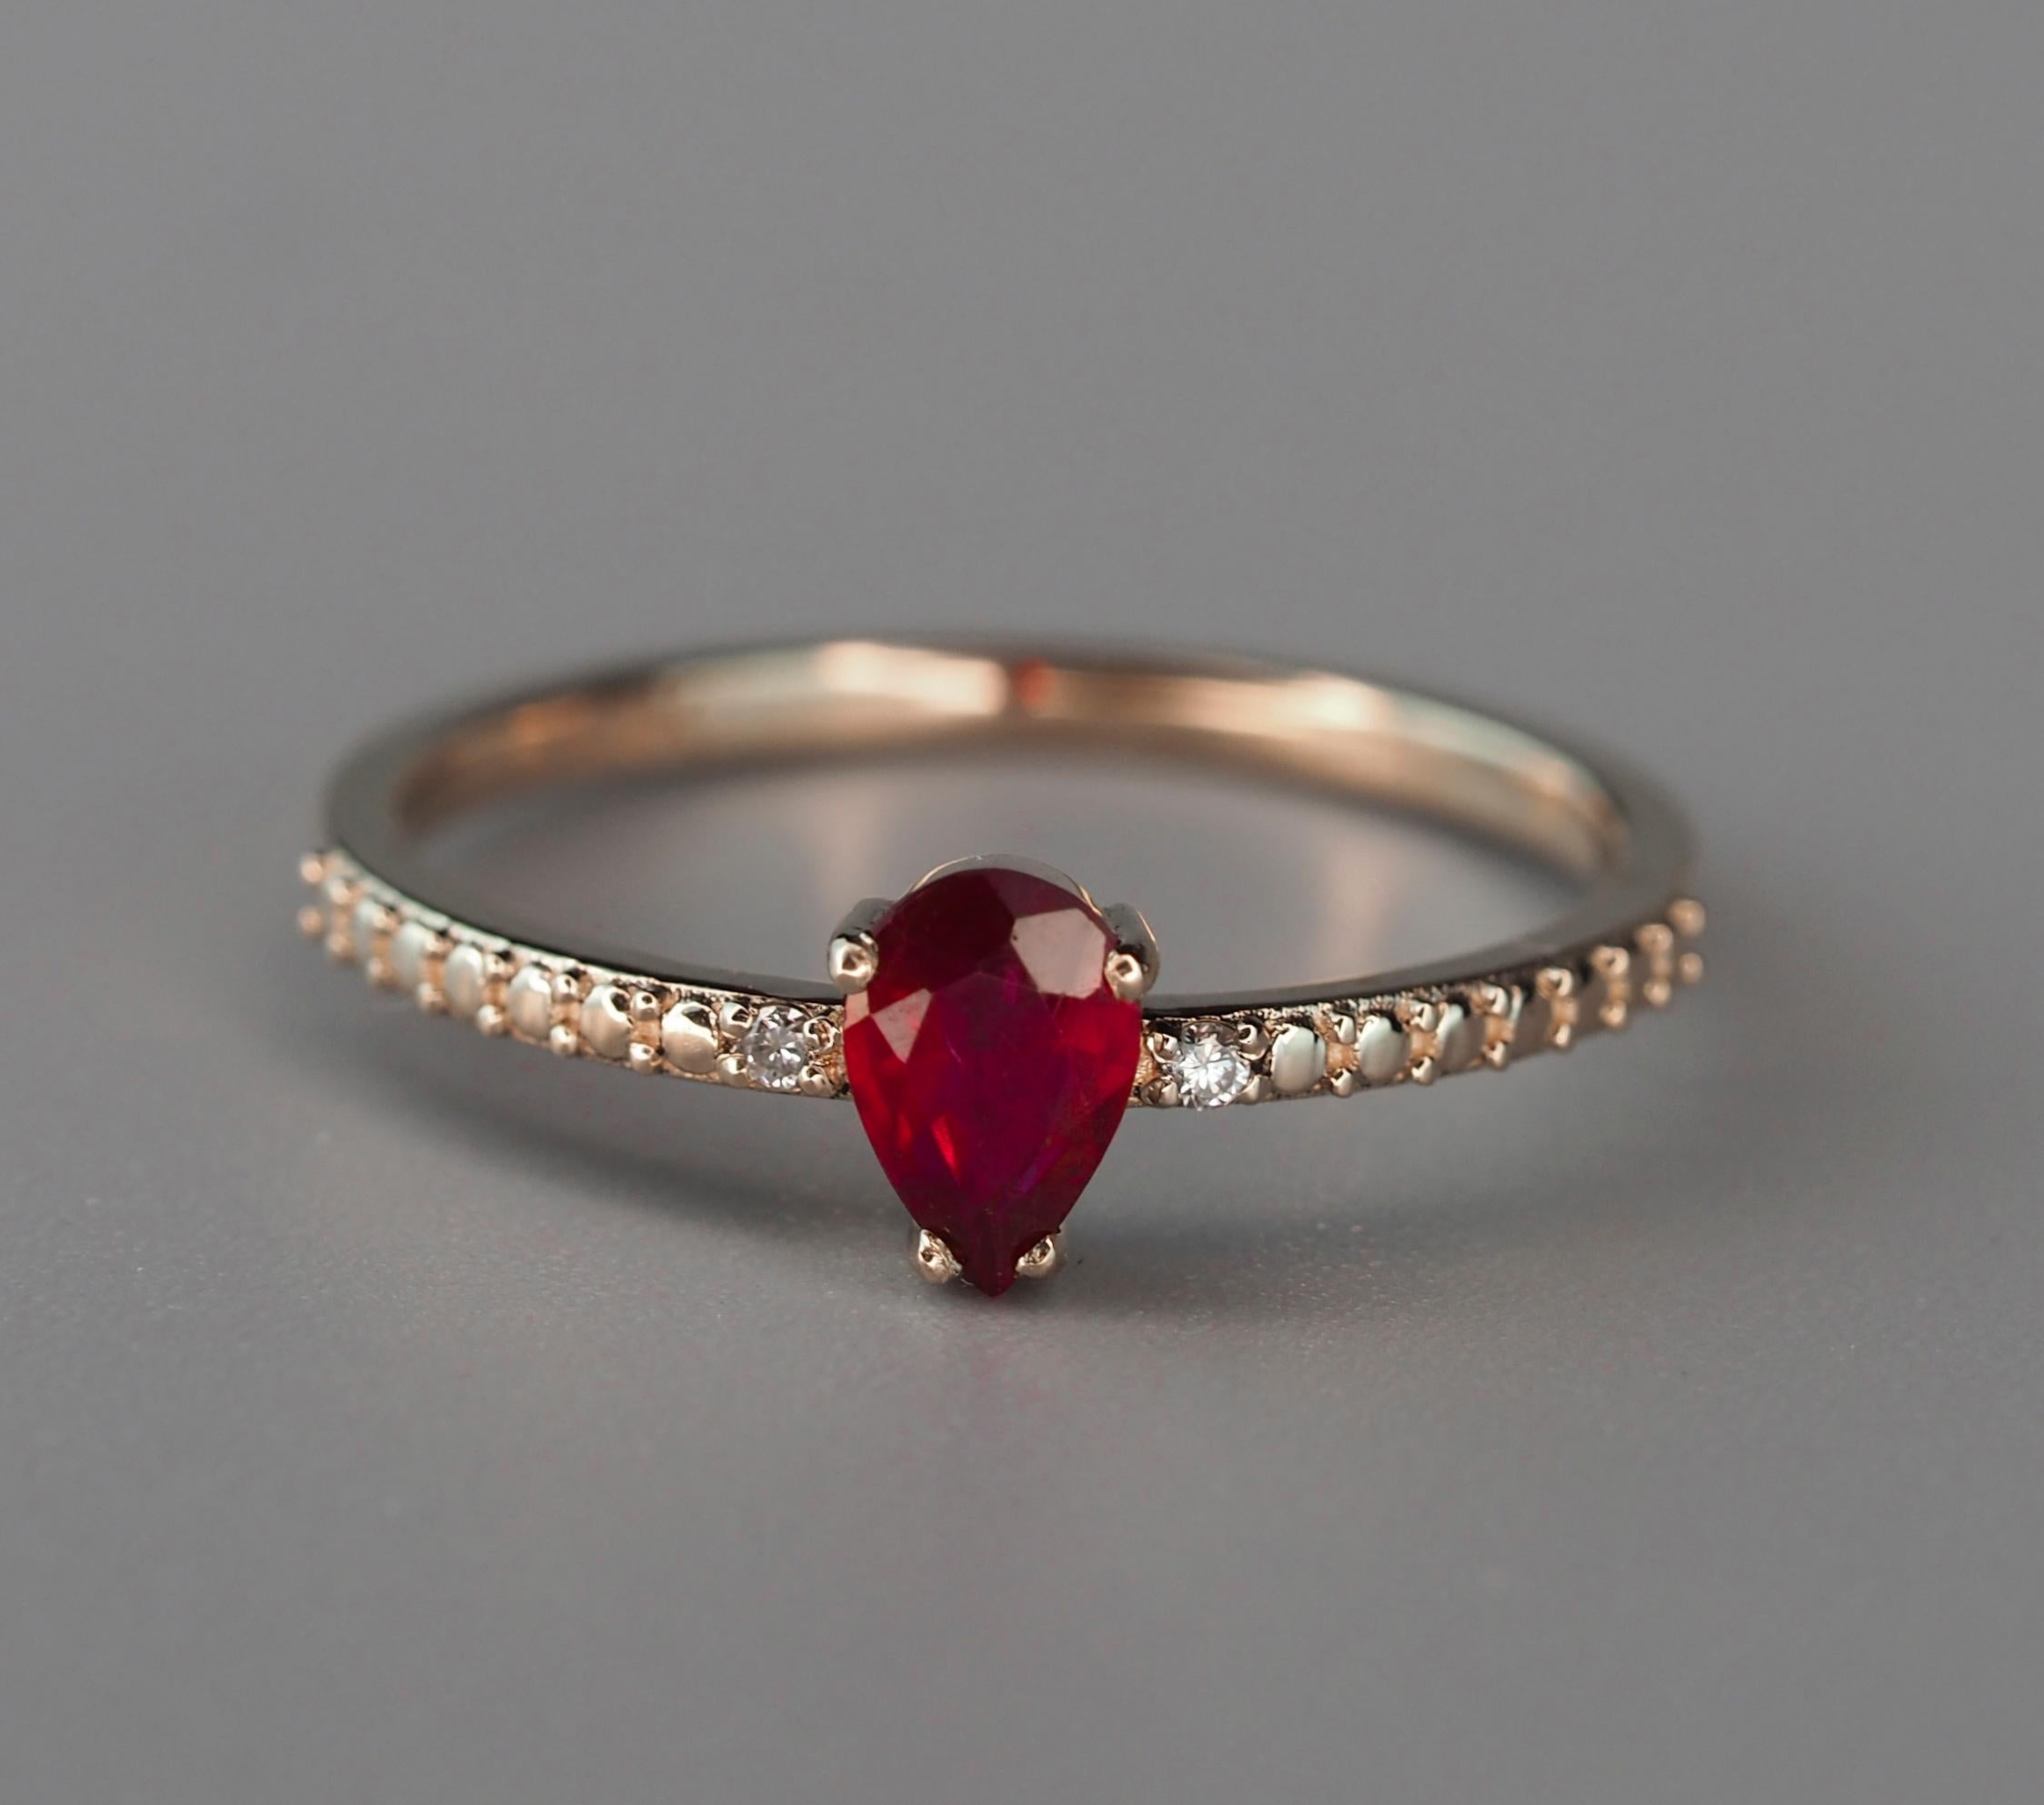 For Sale:  14 karat Gold Ring with Pear Ruby and Diamonds. Minimalist ruby ring 2